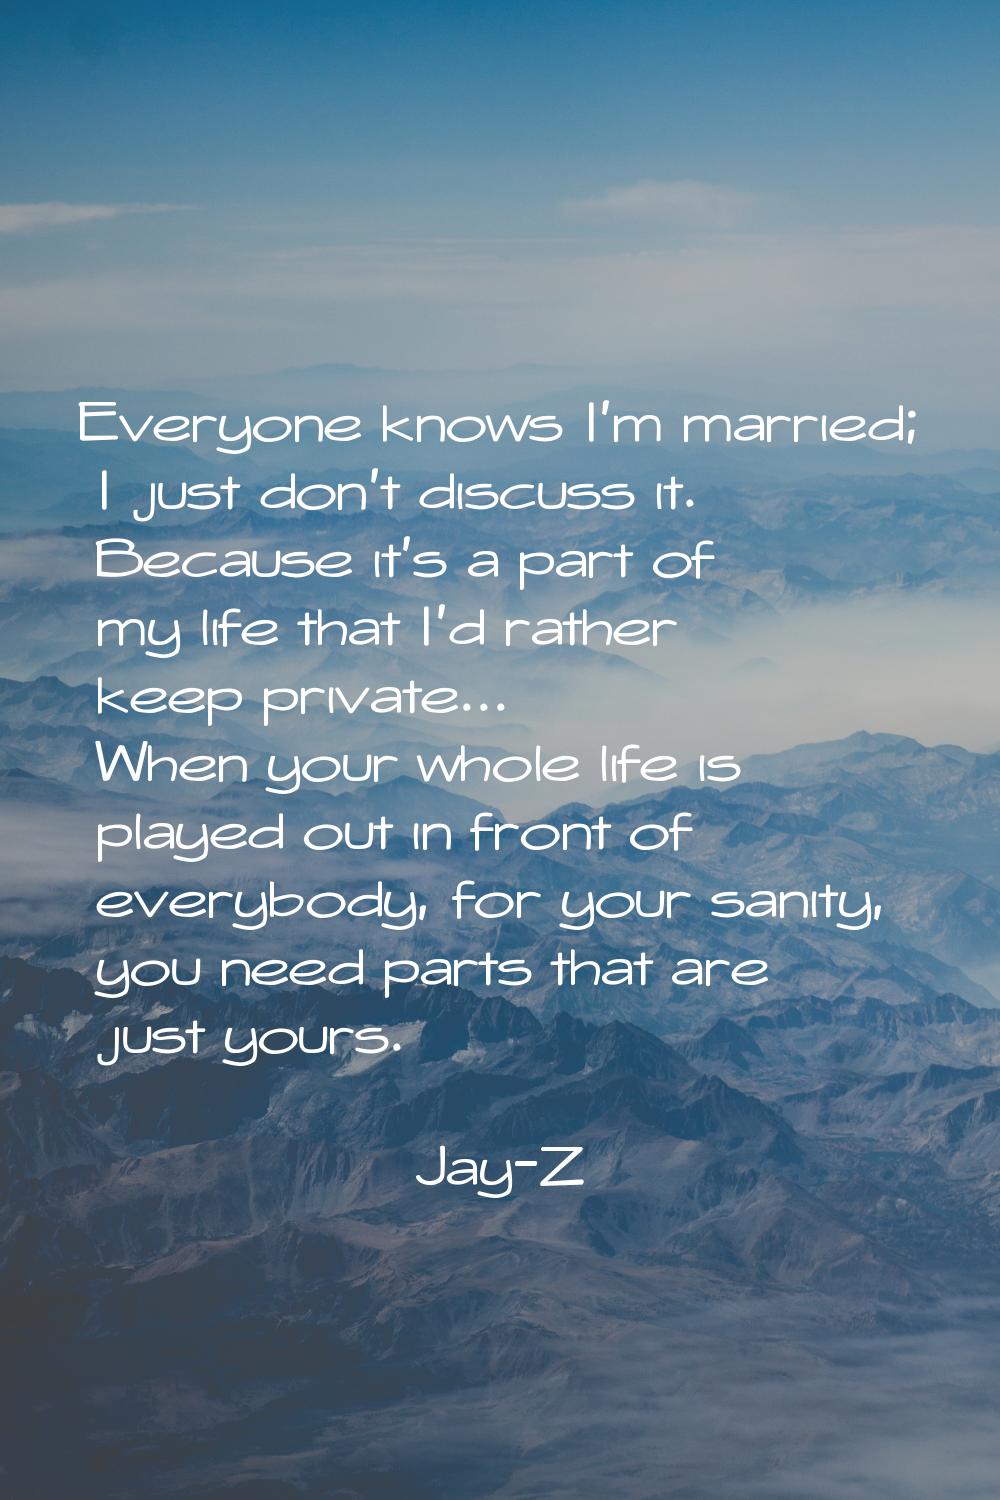 Everyone knows I'm married; I just don't discuss it. Because it's a part of my life that I'd rather